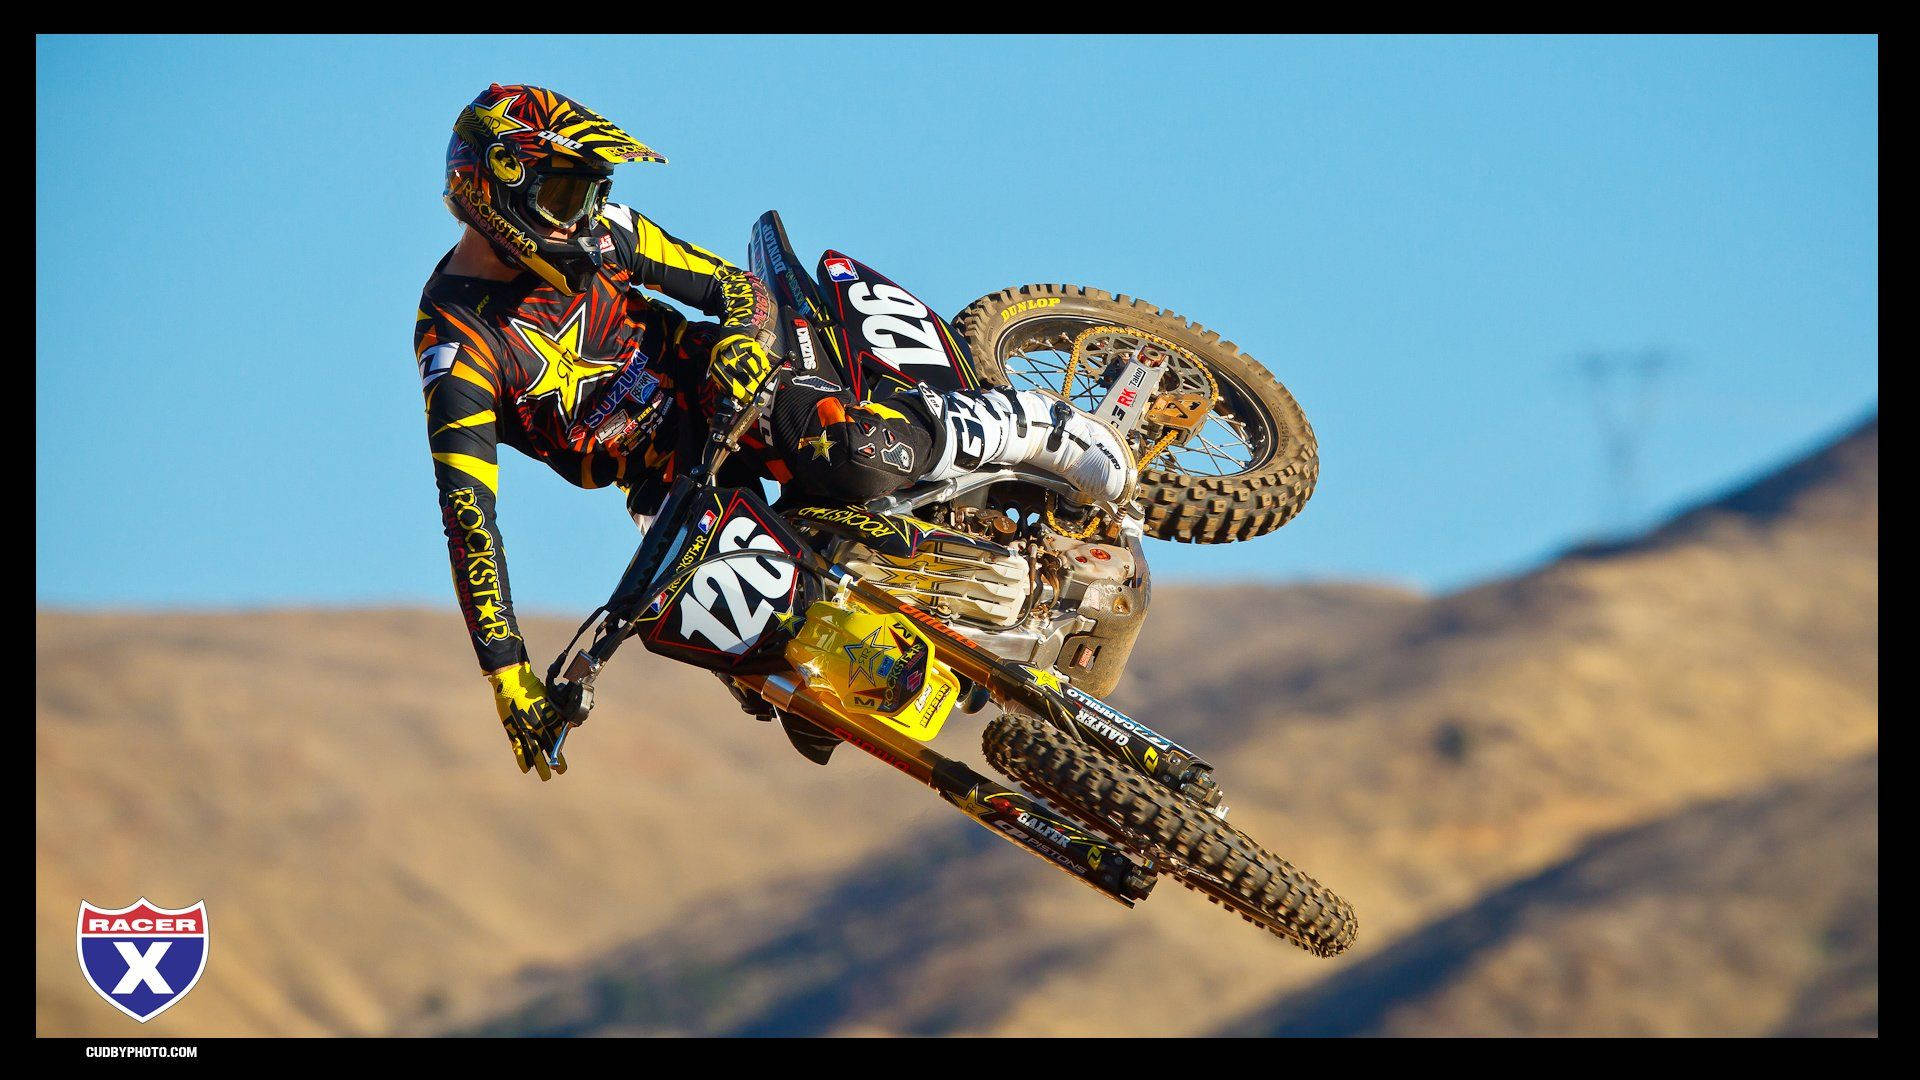 Yellow Dirt Bike In Action Background